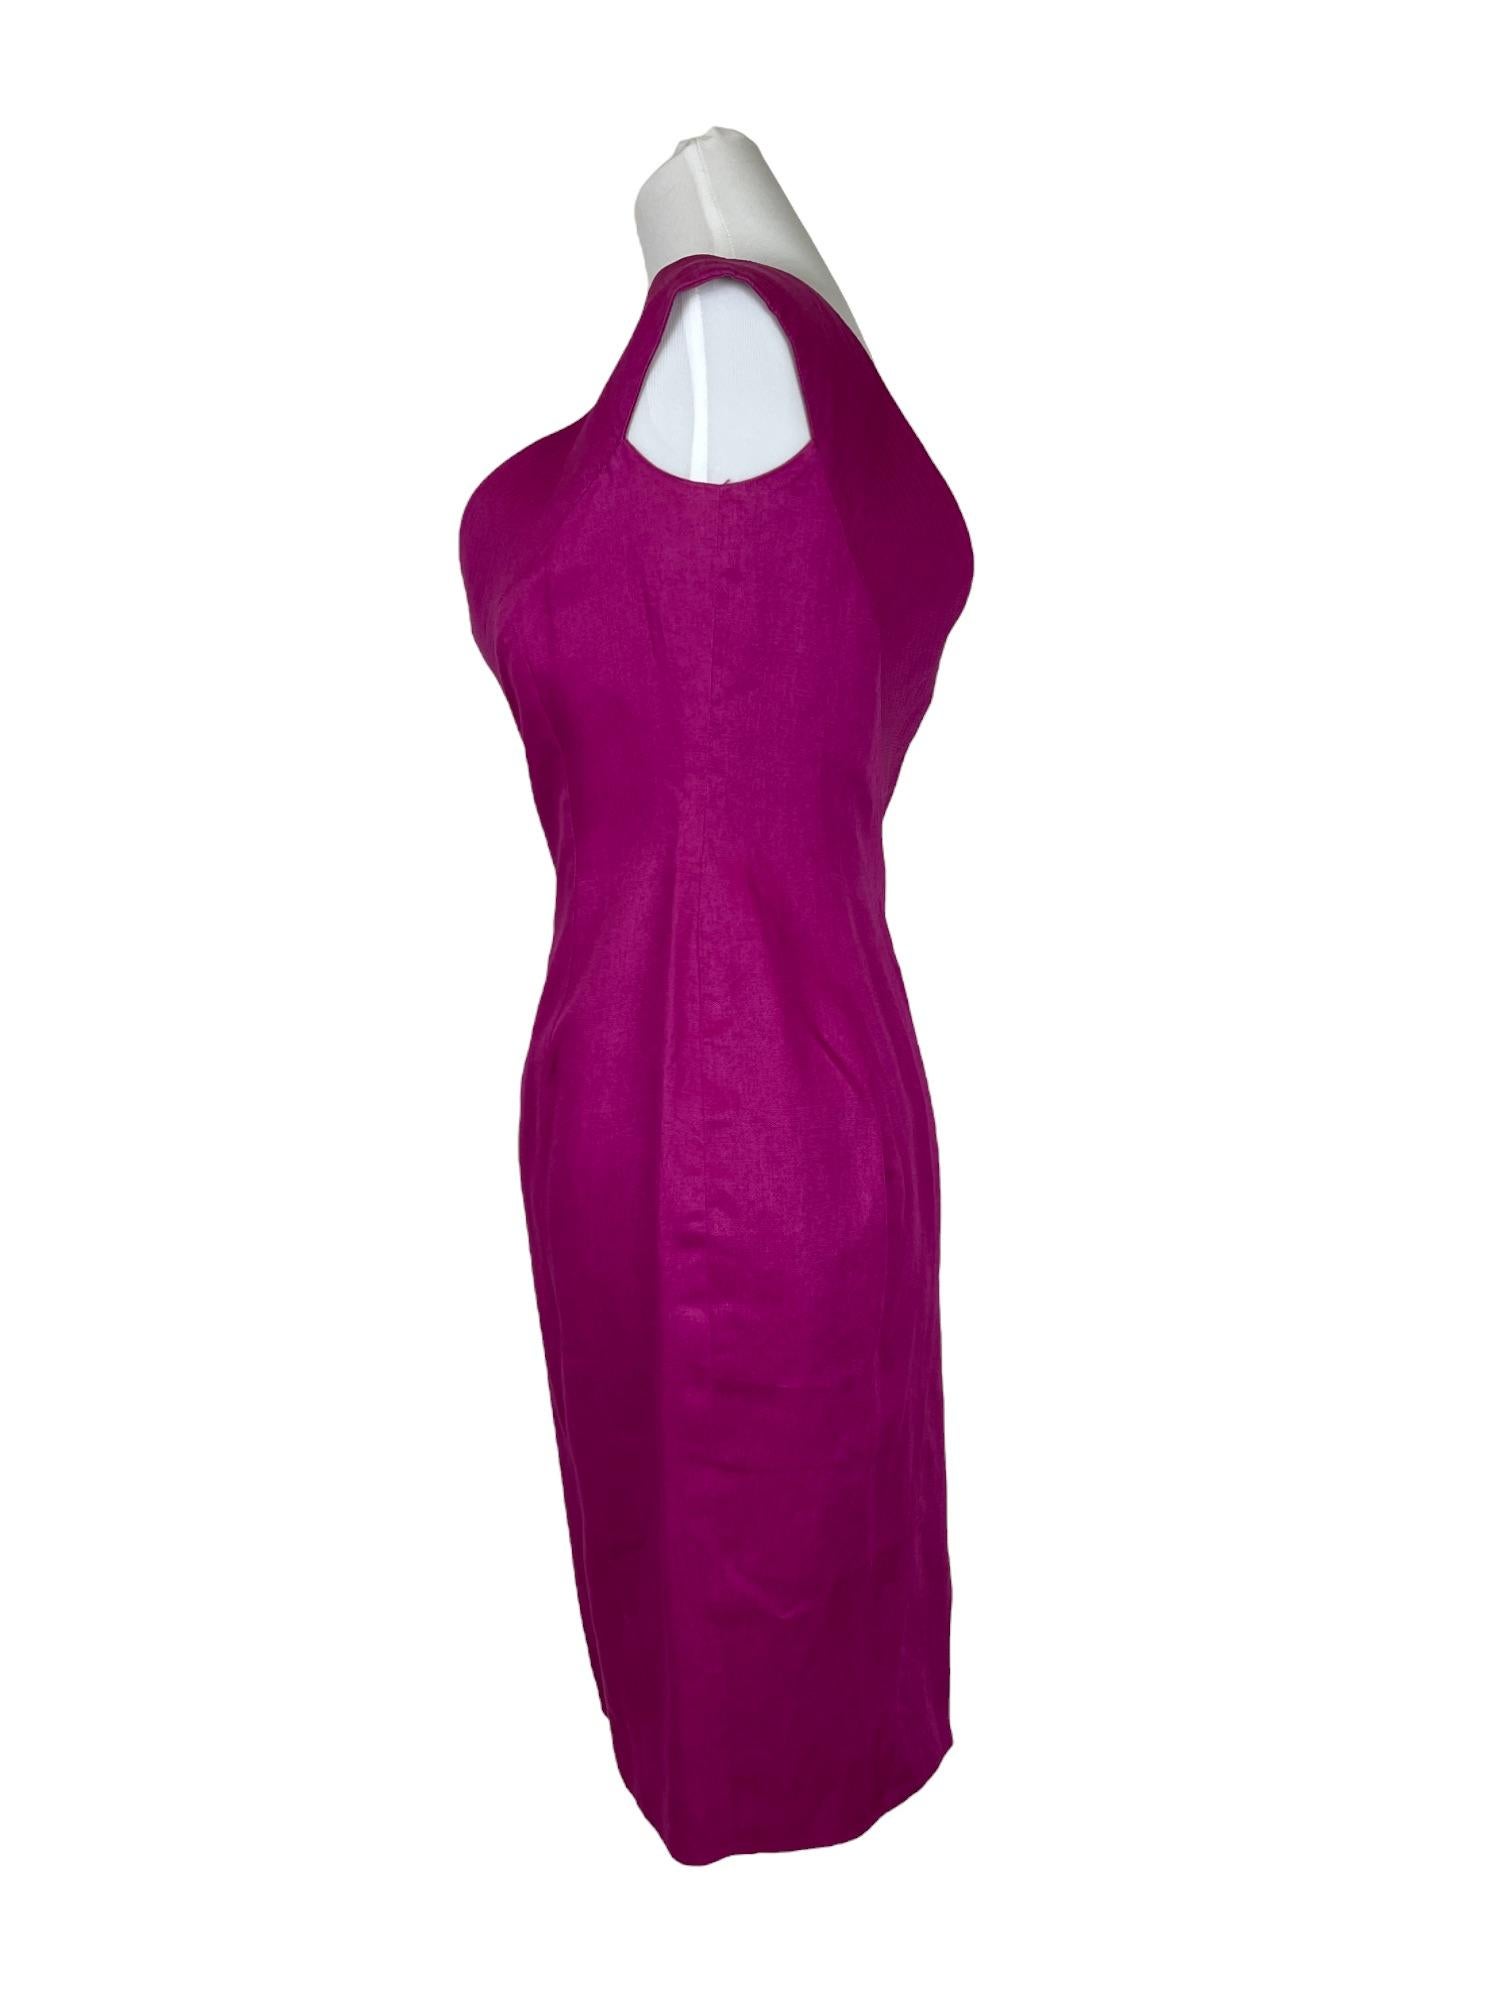 Rare Gianni Versace Couture Pink Dress
1980s
-
NO RETURNS
If you need more information, please contact us! 
